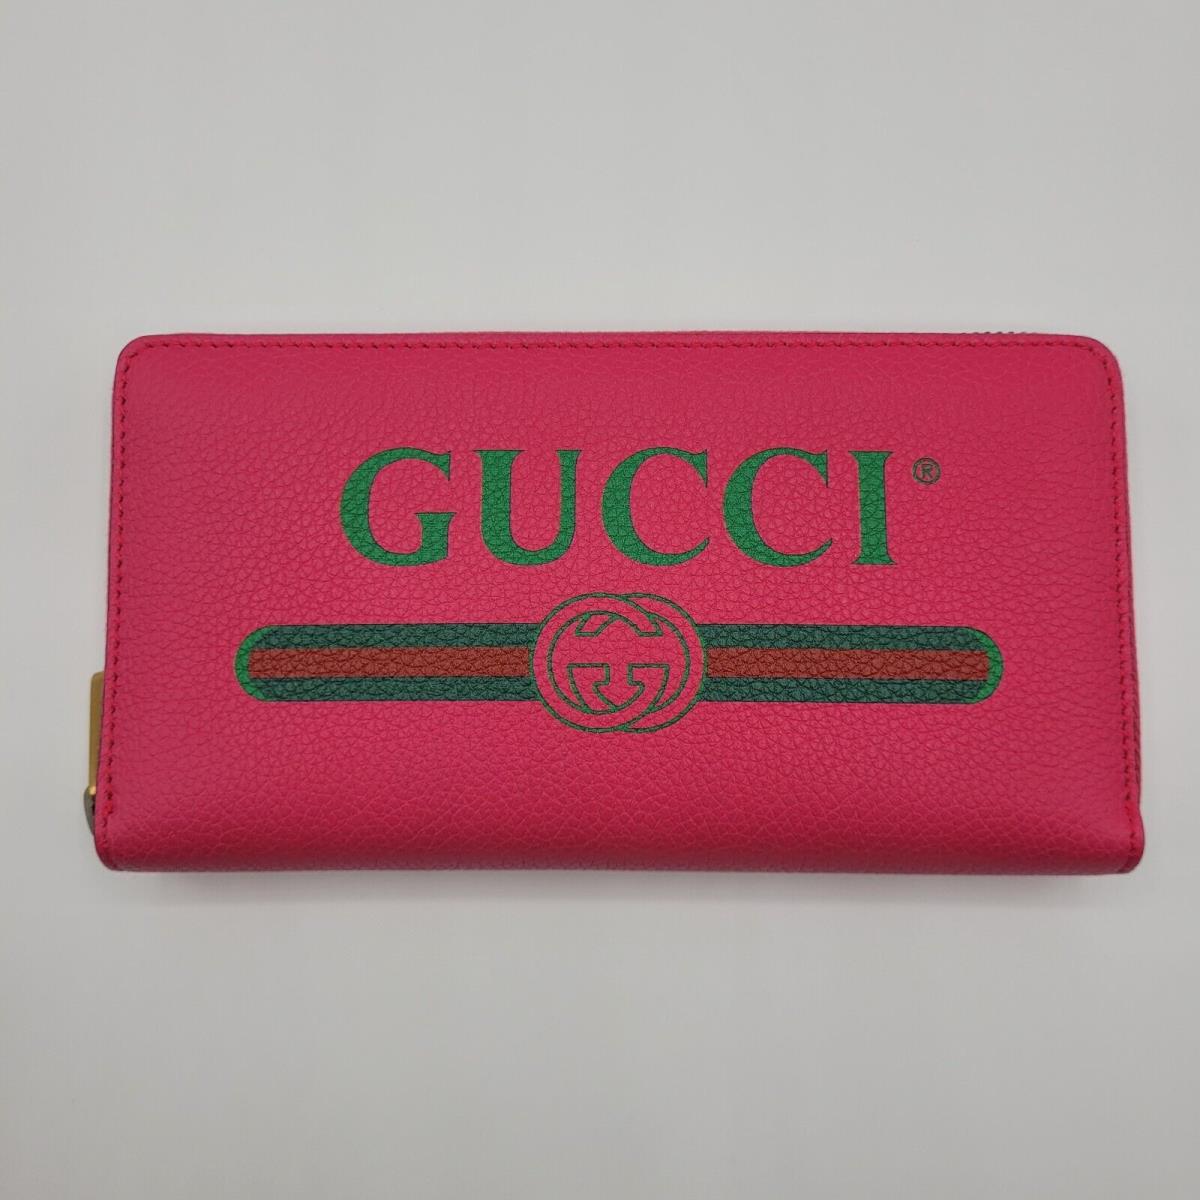 Gucci Pink Leather Long Continental Zip Around Wallet W/logo Print 496317 8840